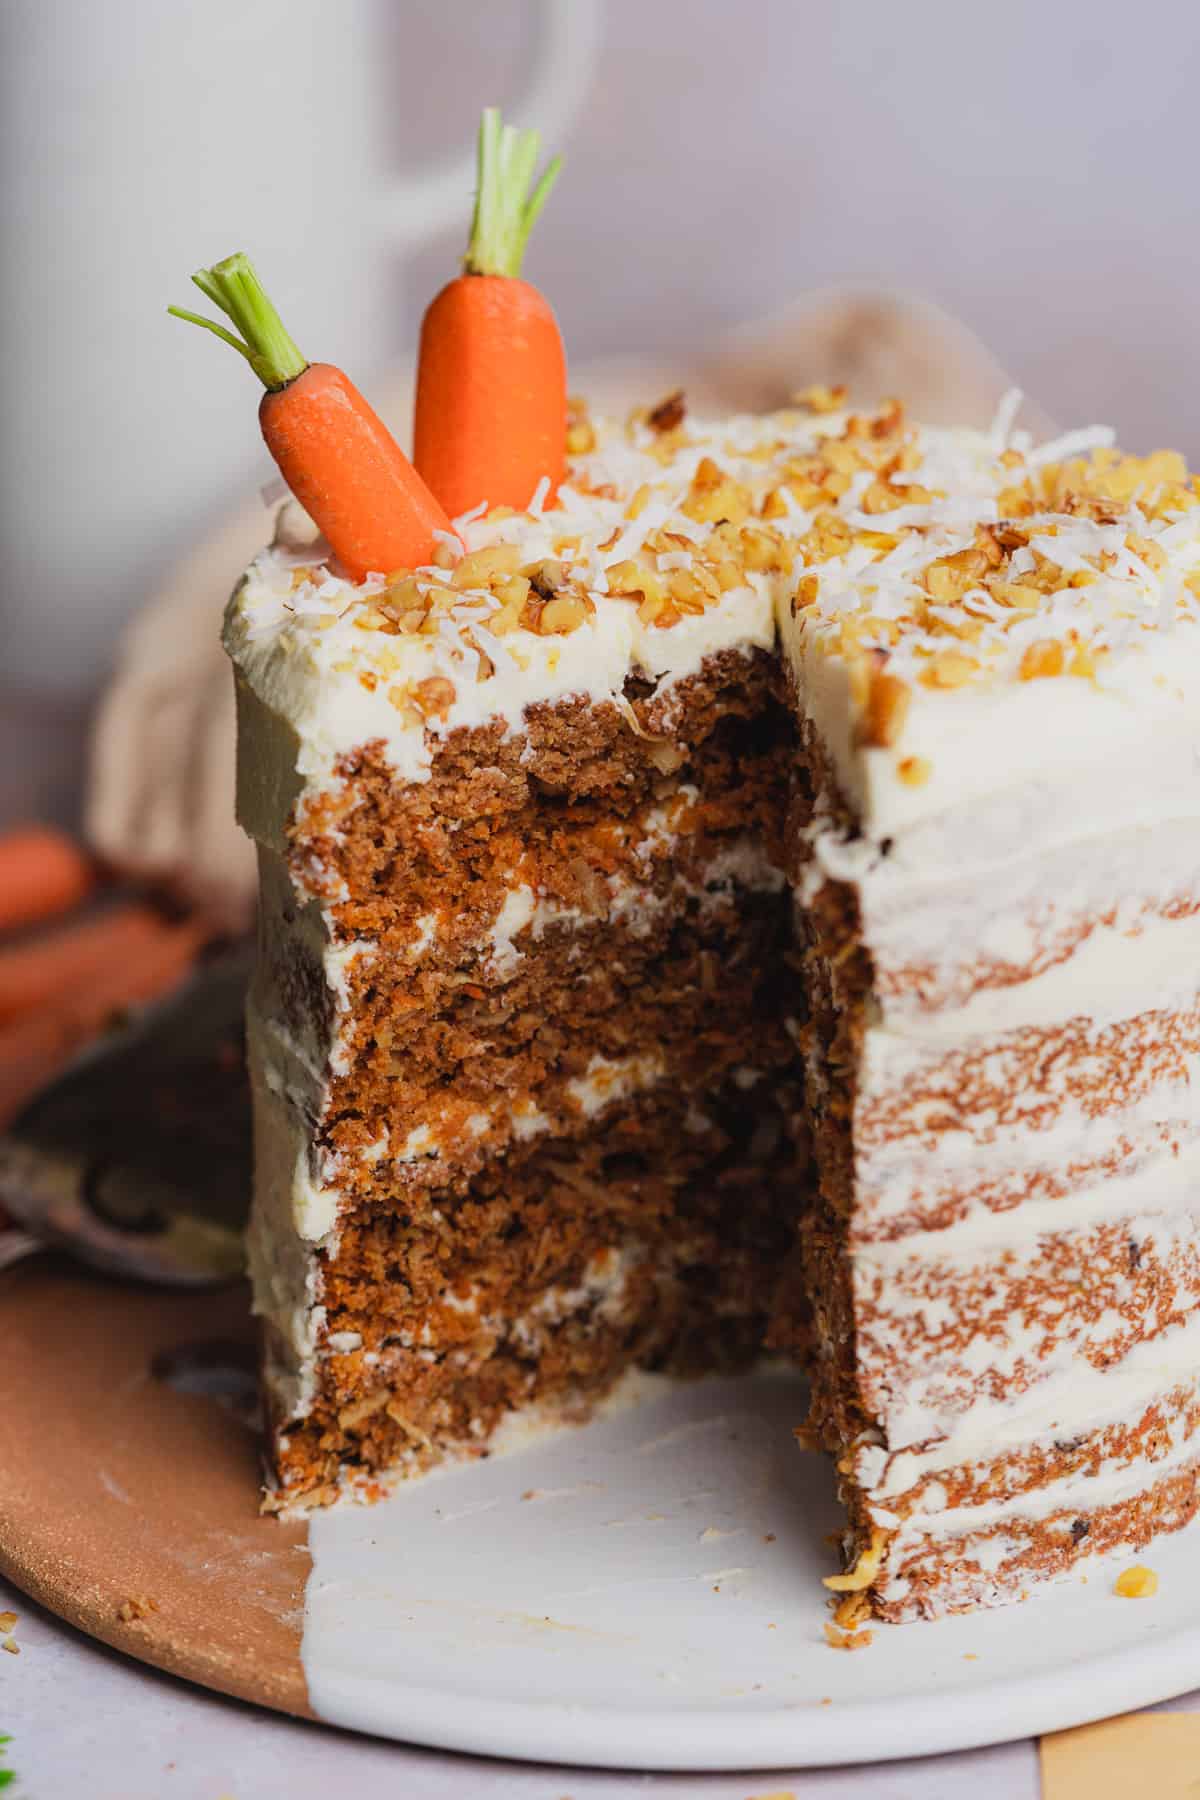 shot of a keto carrot cake topped with walnuts and real carrots poking out of the top.